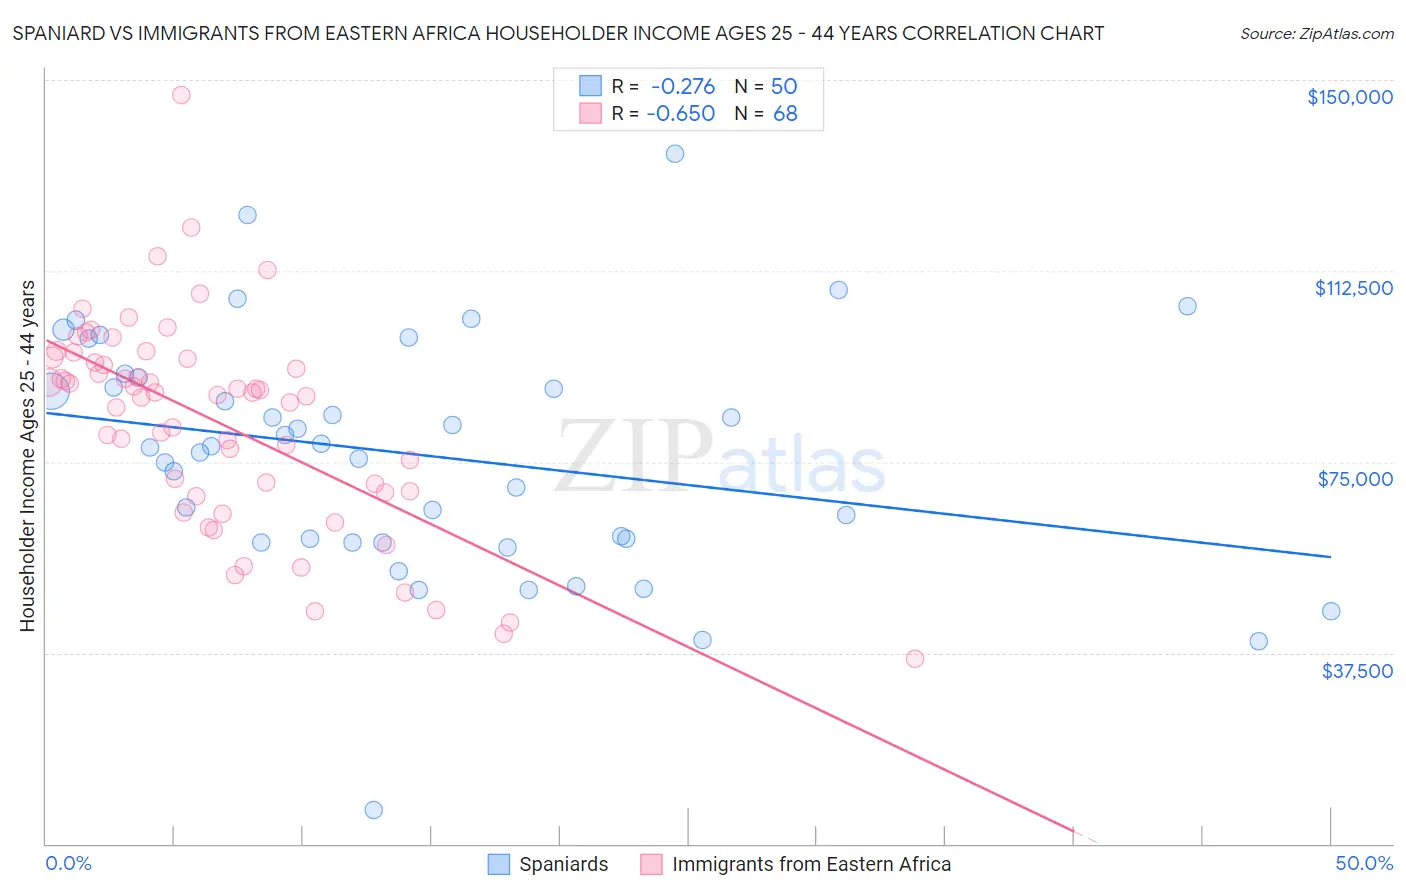 Spaniard vs Immigrants from Eastern Africa Householder Income Ages 25 - 44 years